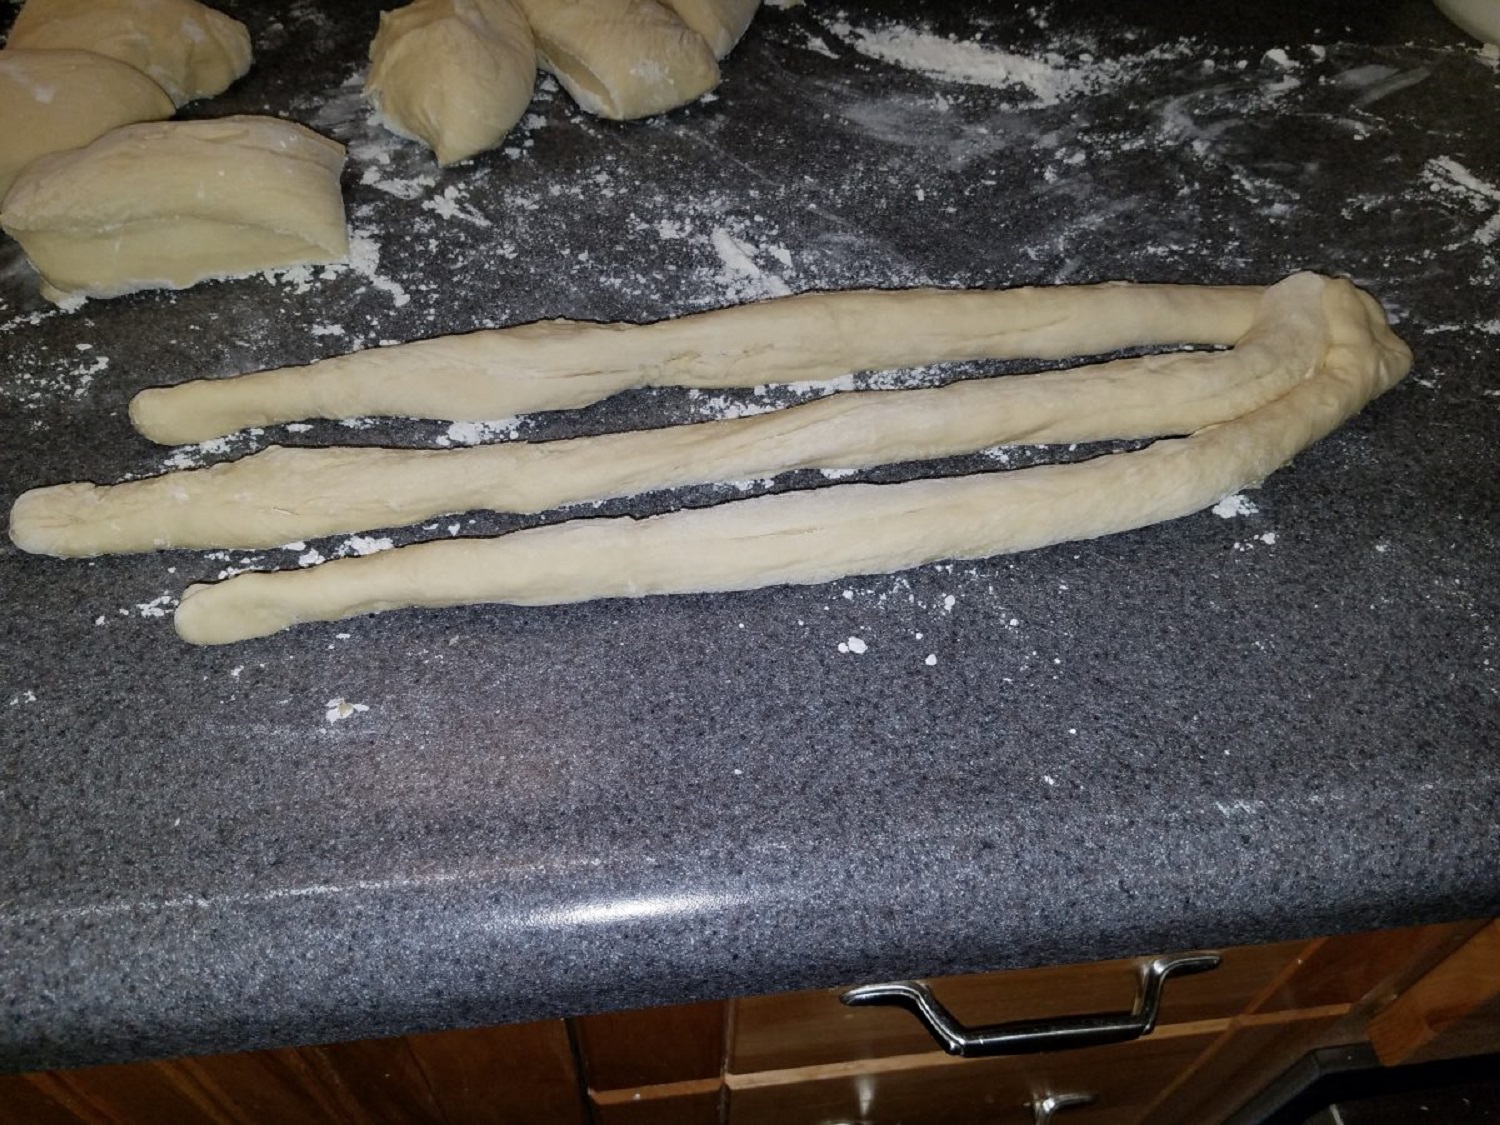 Bread dough rolled out